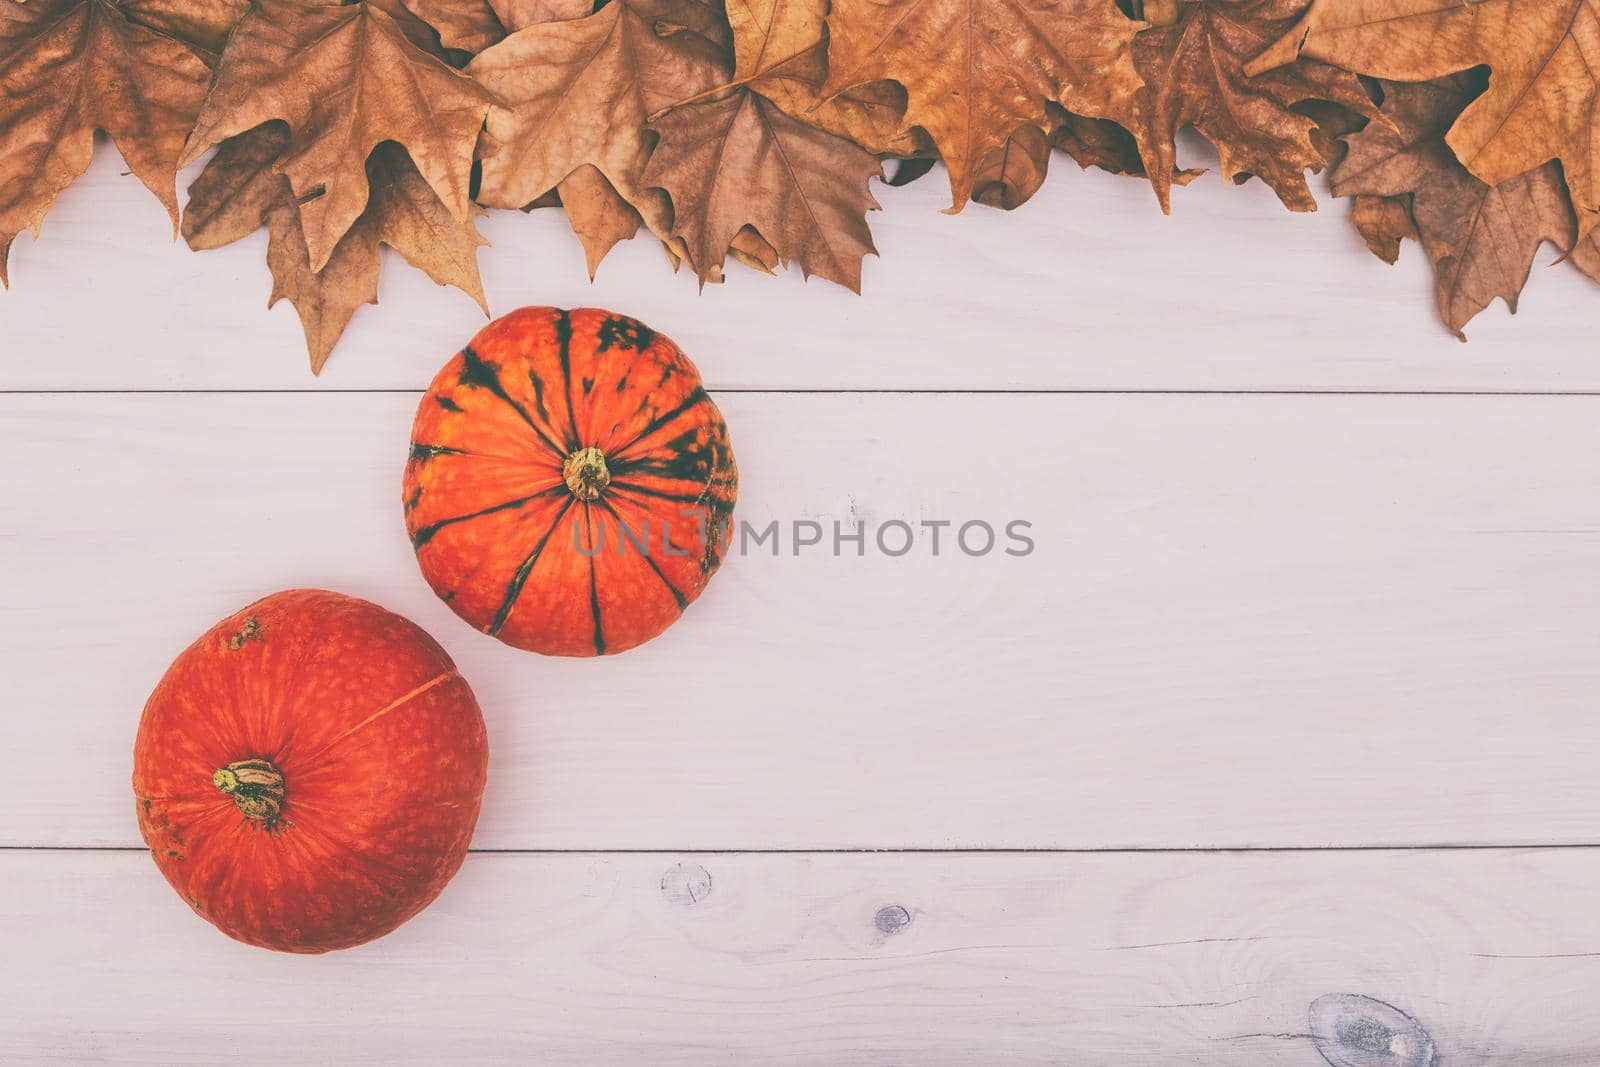 Image of pumpkins on wooden table with autumn leaves.Image is intentionally toned.